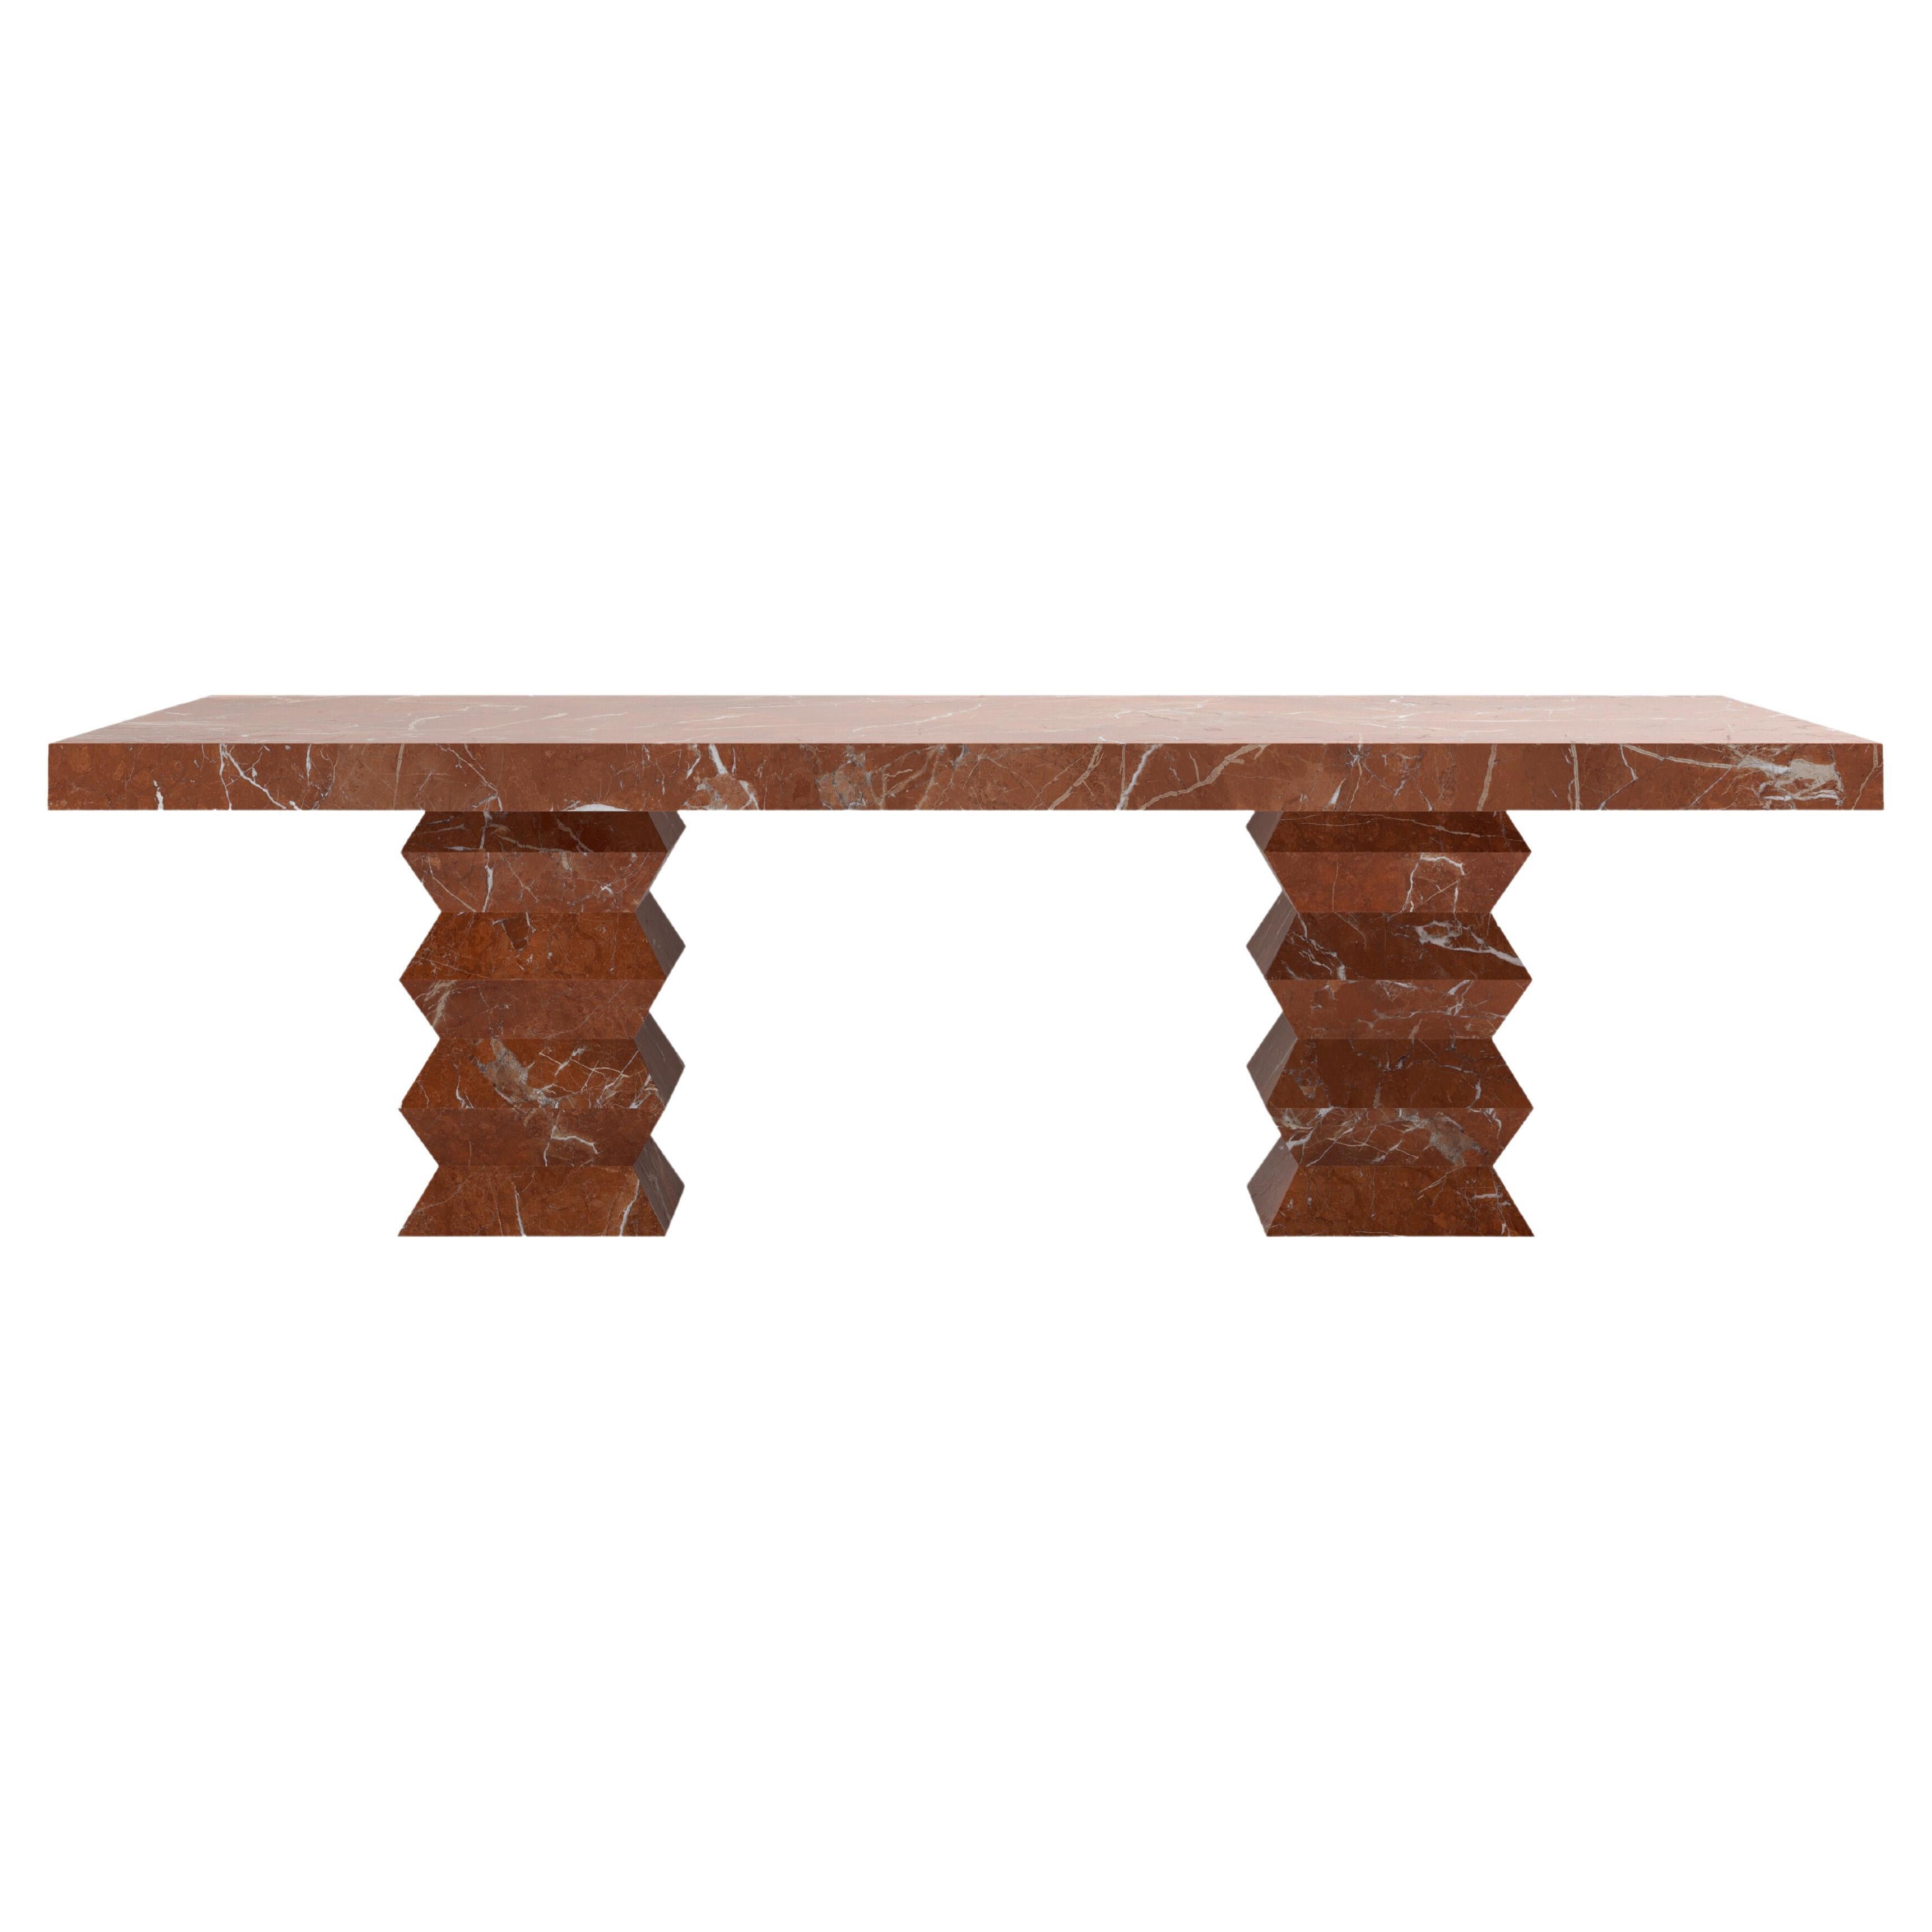 FORM(LA) Grinza Rectangle Dining Table 108"L x 48"W x 32"H Rojo Alicante Marble For Sale